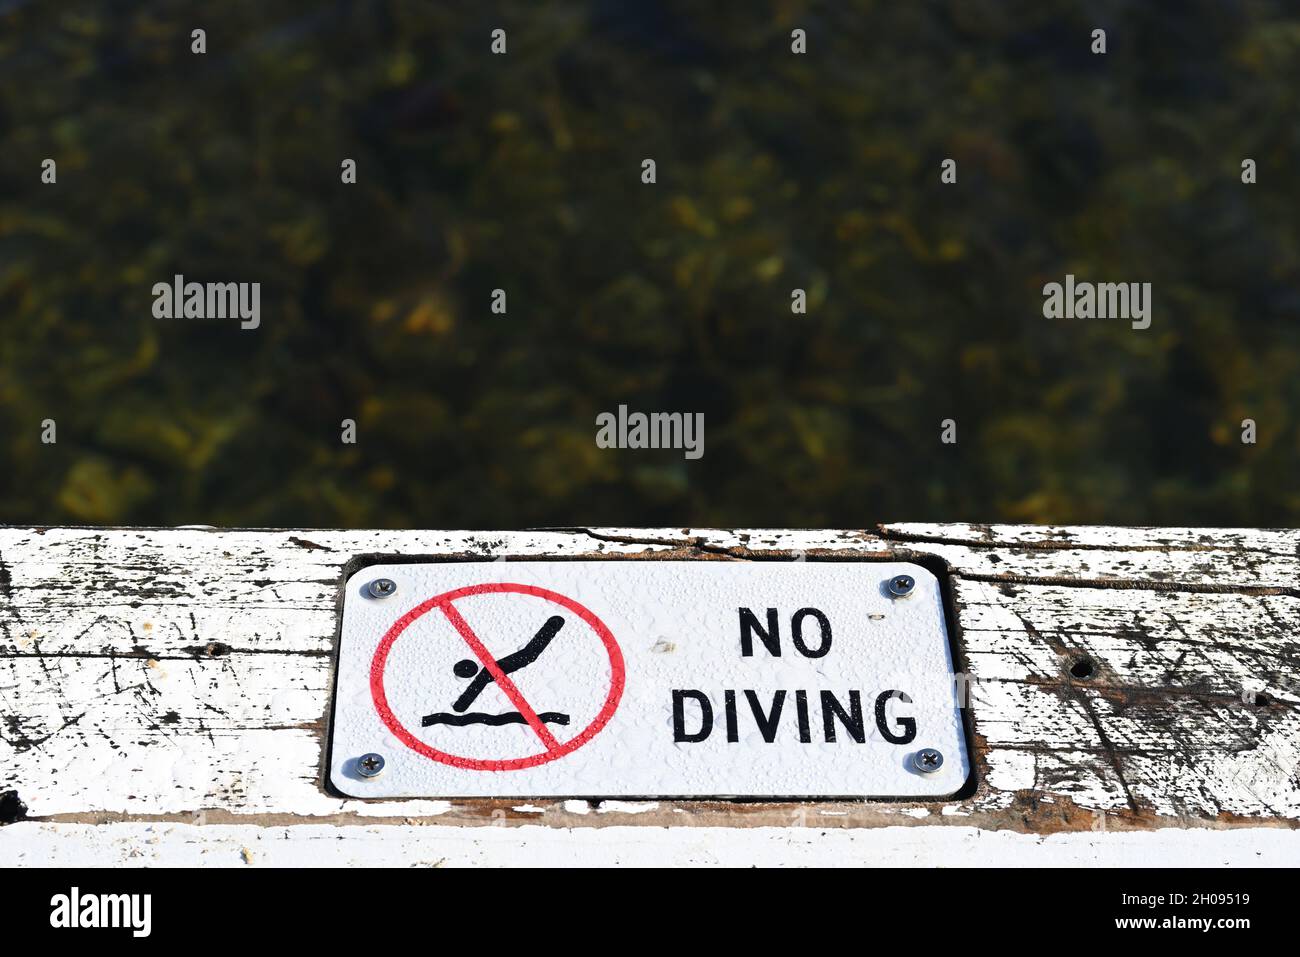 A damp no divining sign on a white weatherworn wooden surface, with out of focus water in the background Stock Photo